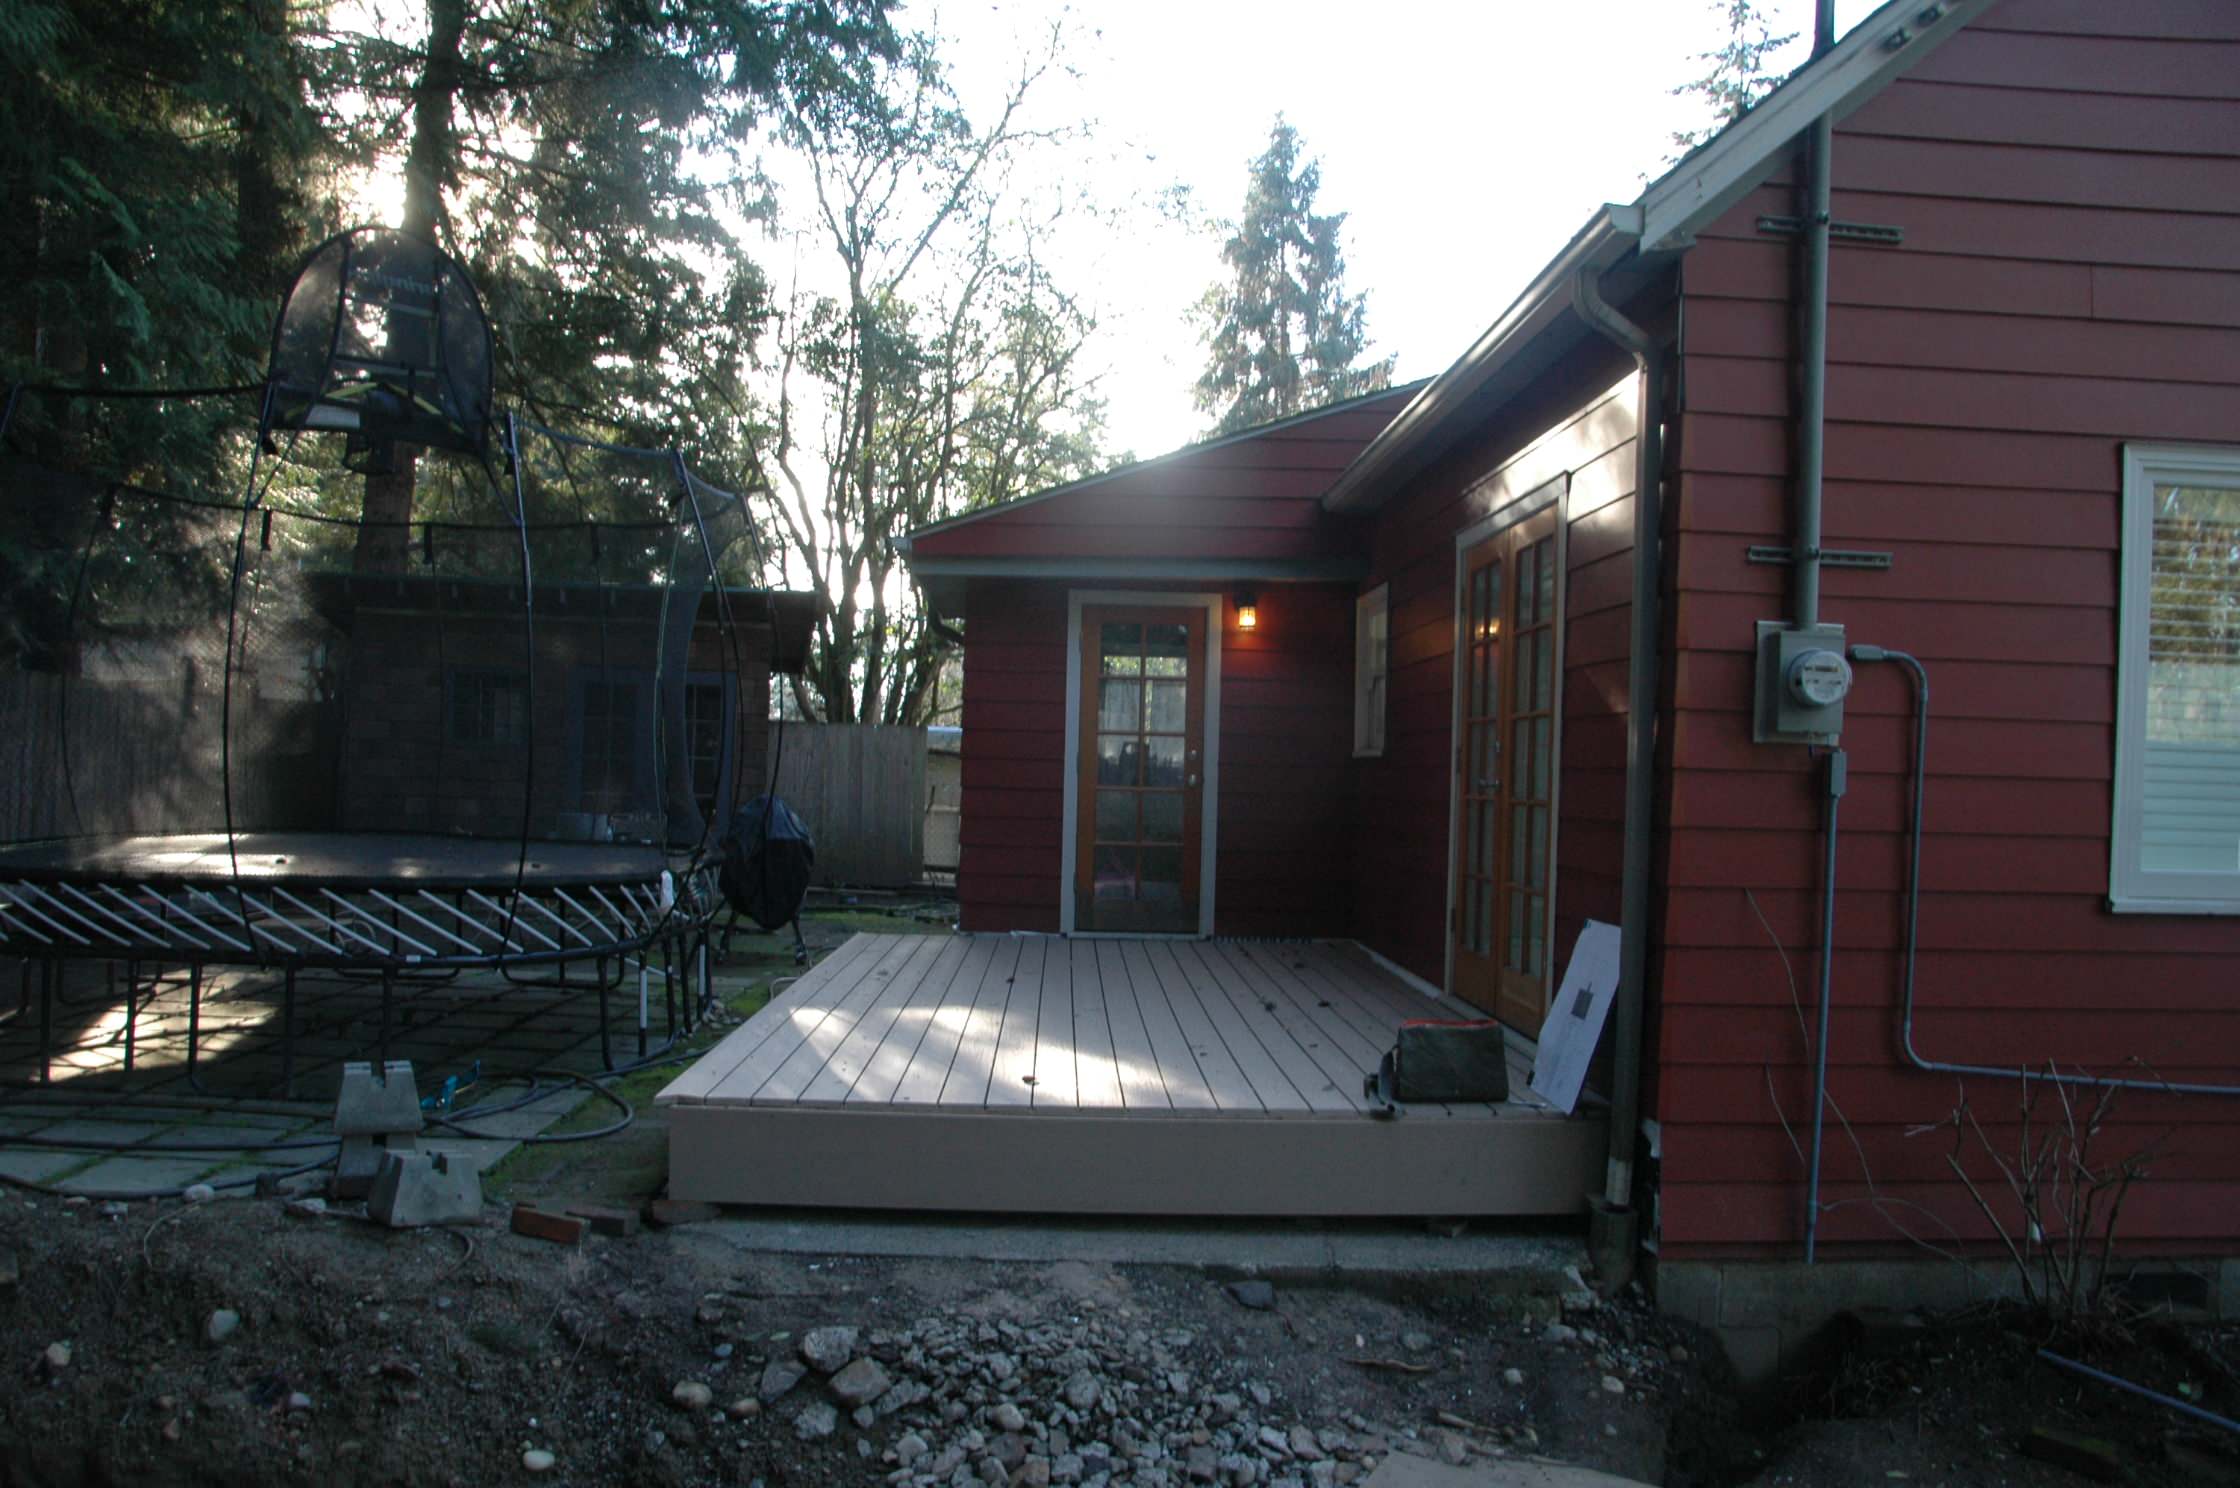 North Seattle Residence - existing reardeck and garden